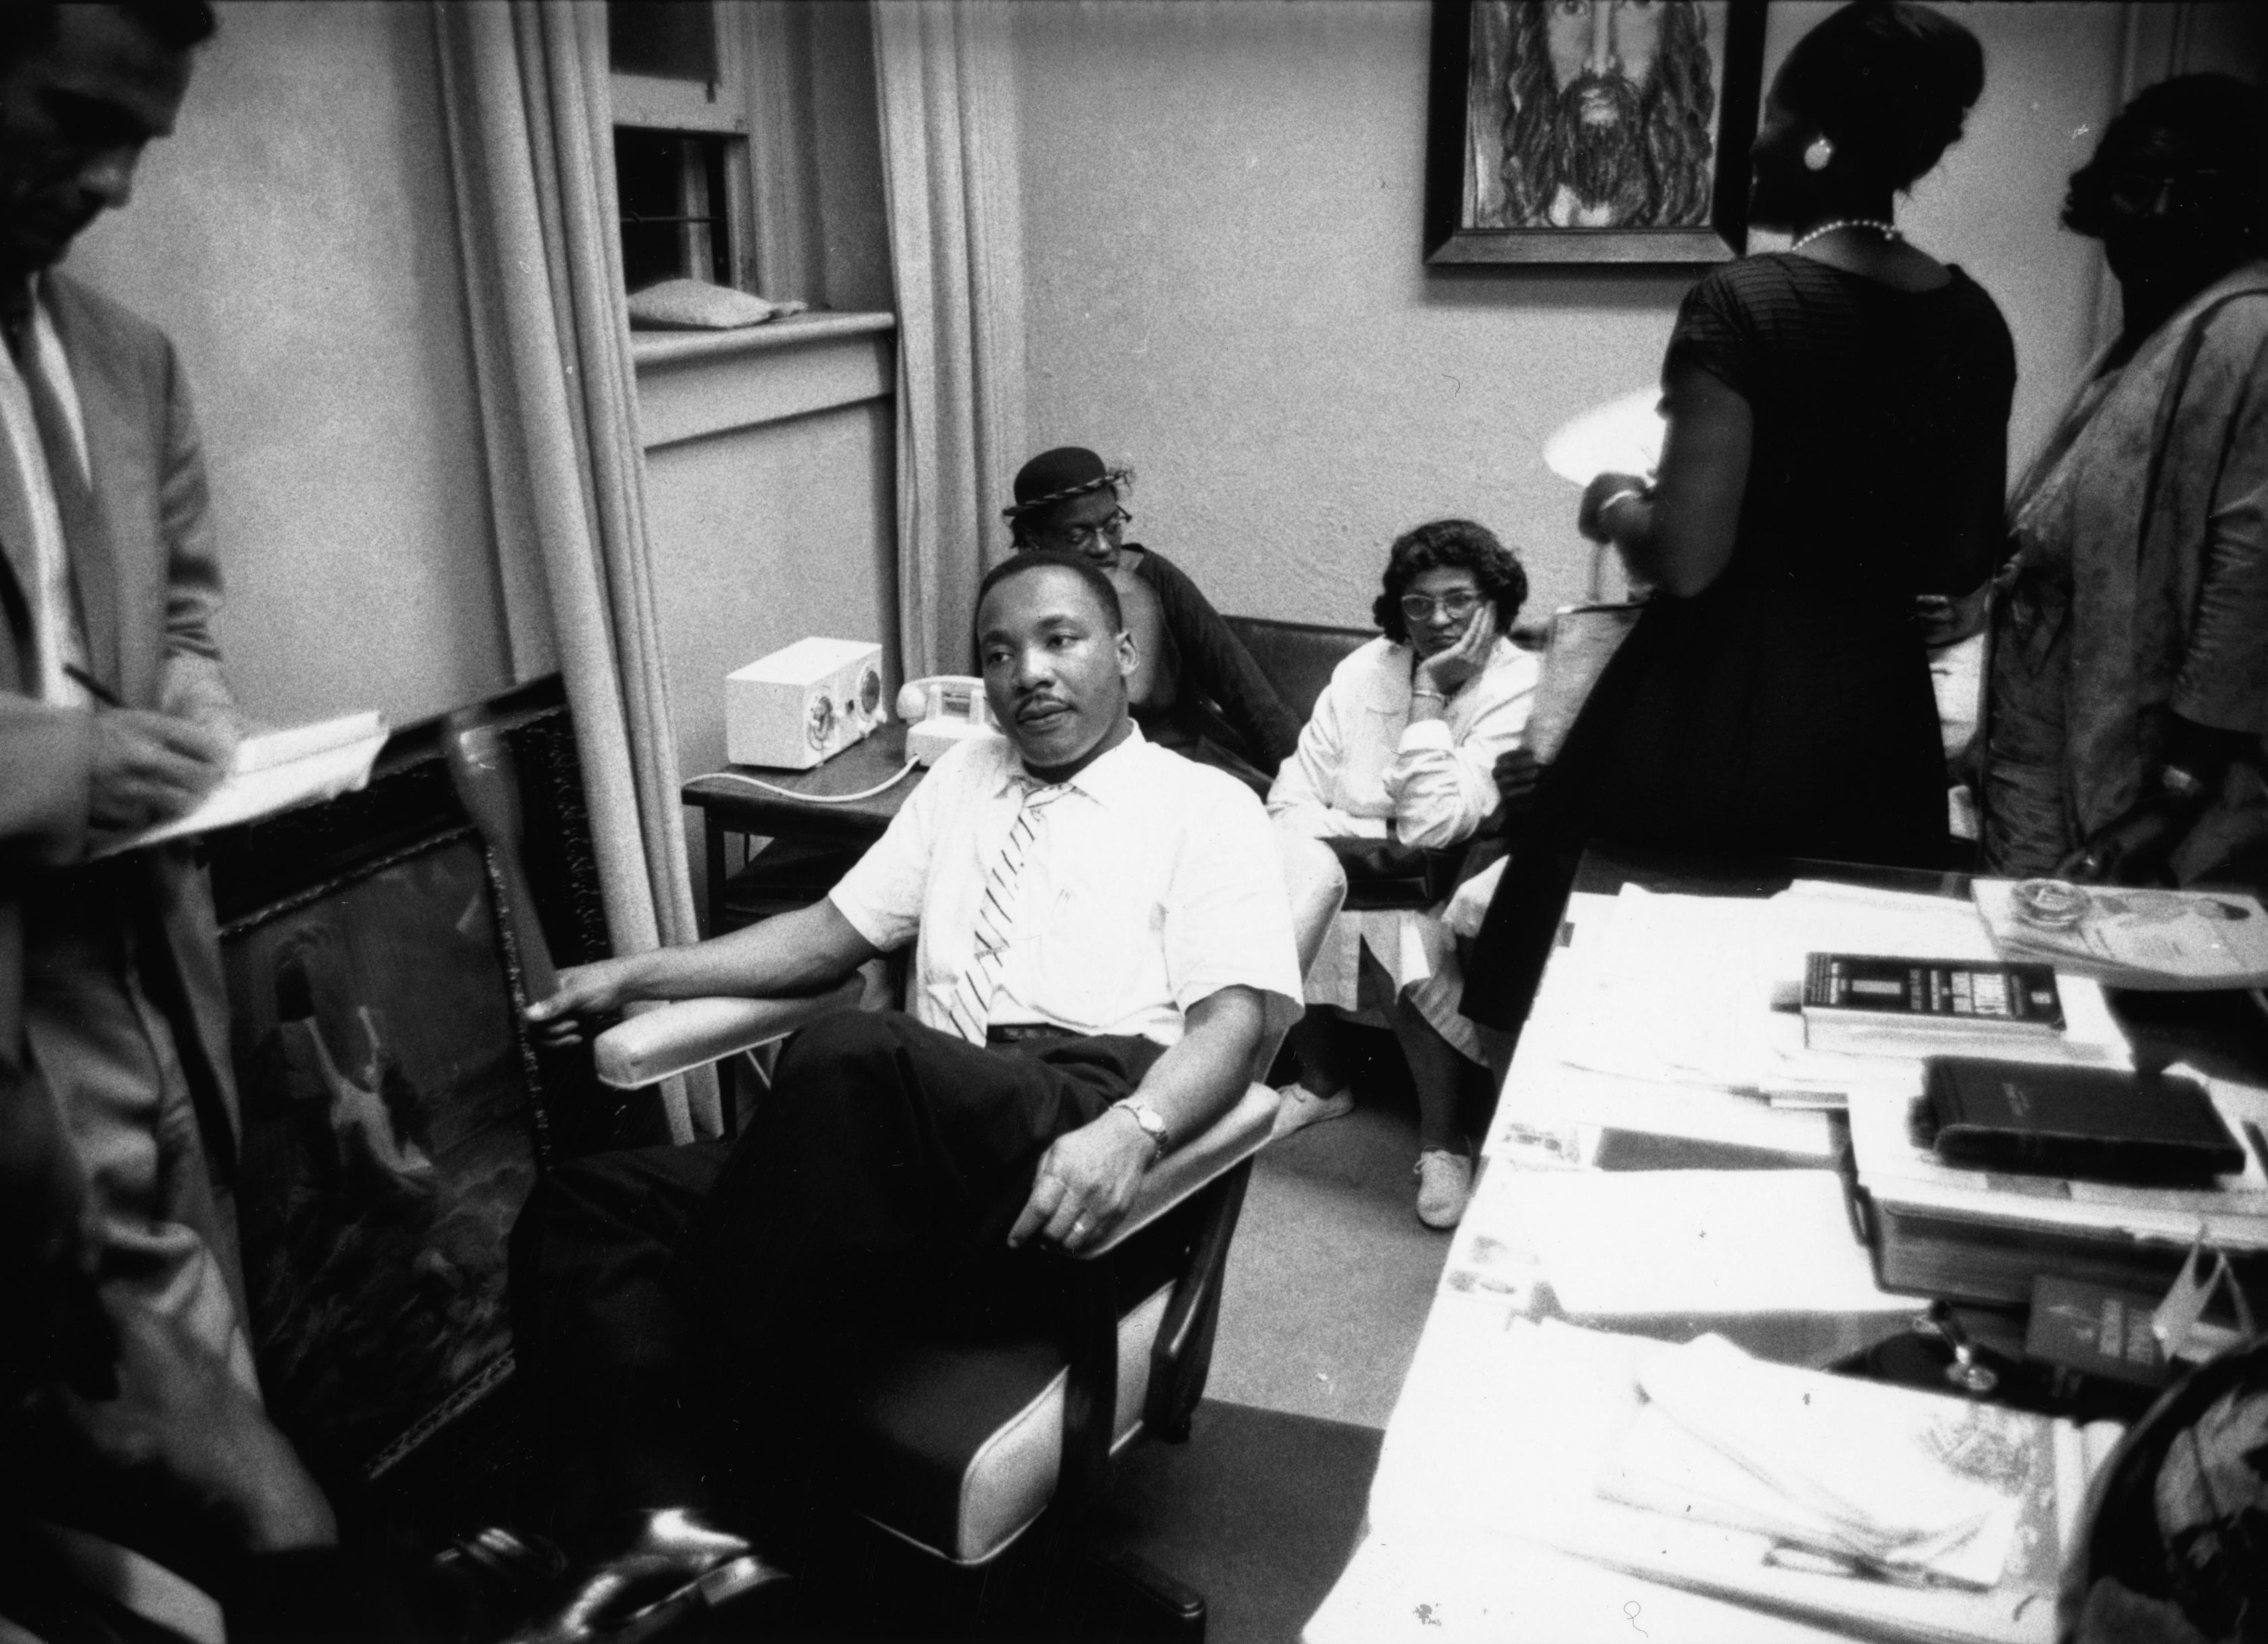 Dr. King sits in a chair